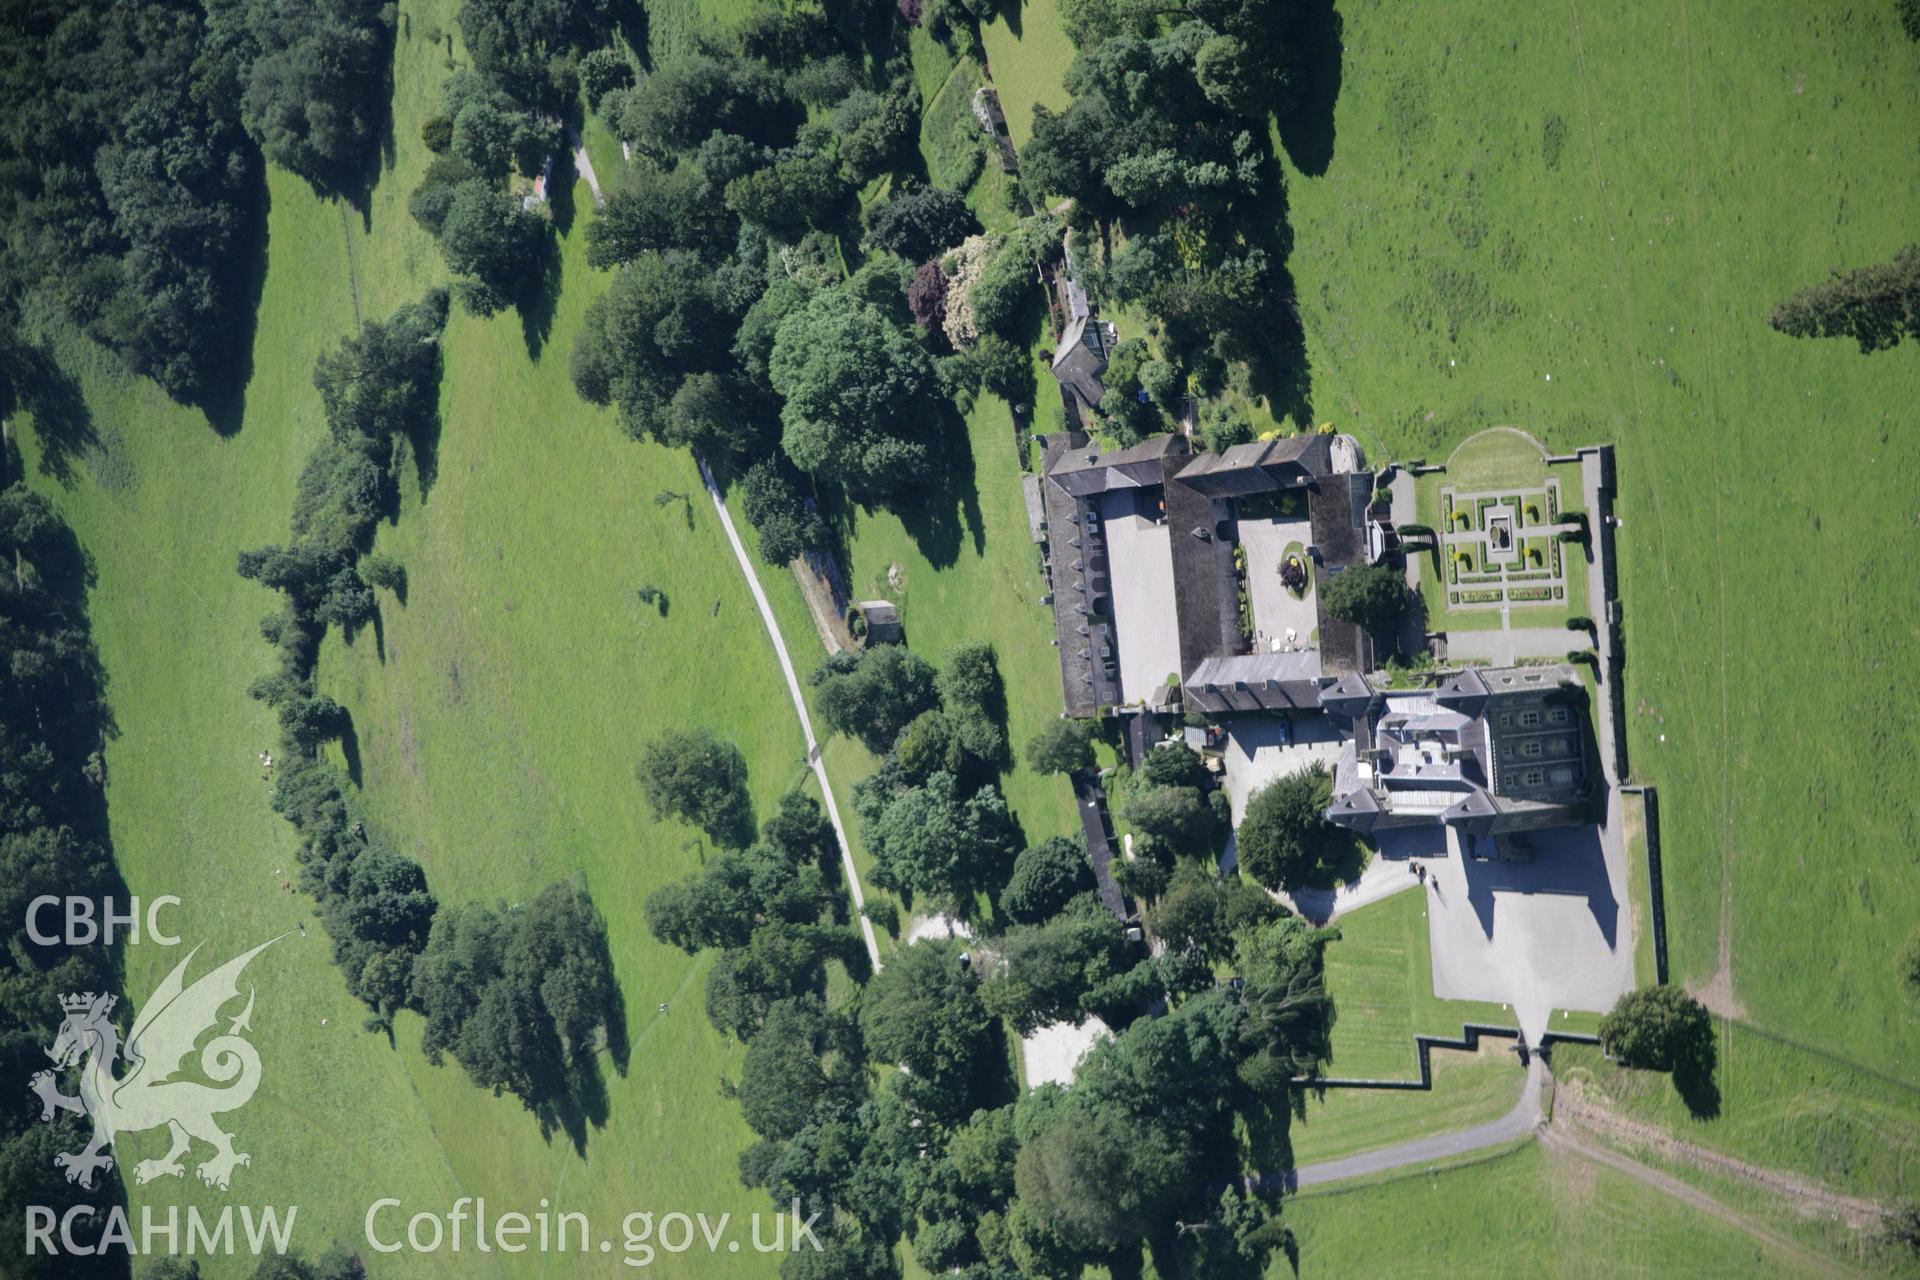 RCAHMW colour oblique aerial photograph of Newton House, (Dinefwr Castle), Llandeilo, viewed from the north. Taken on 22 June 2005 by Toby Driver